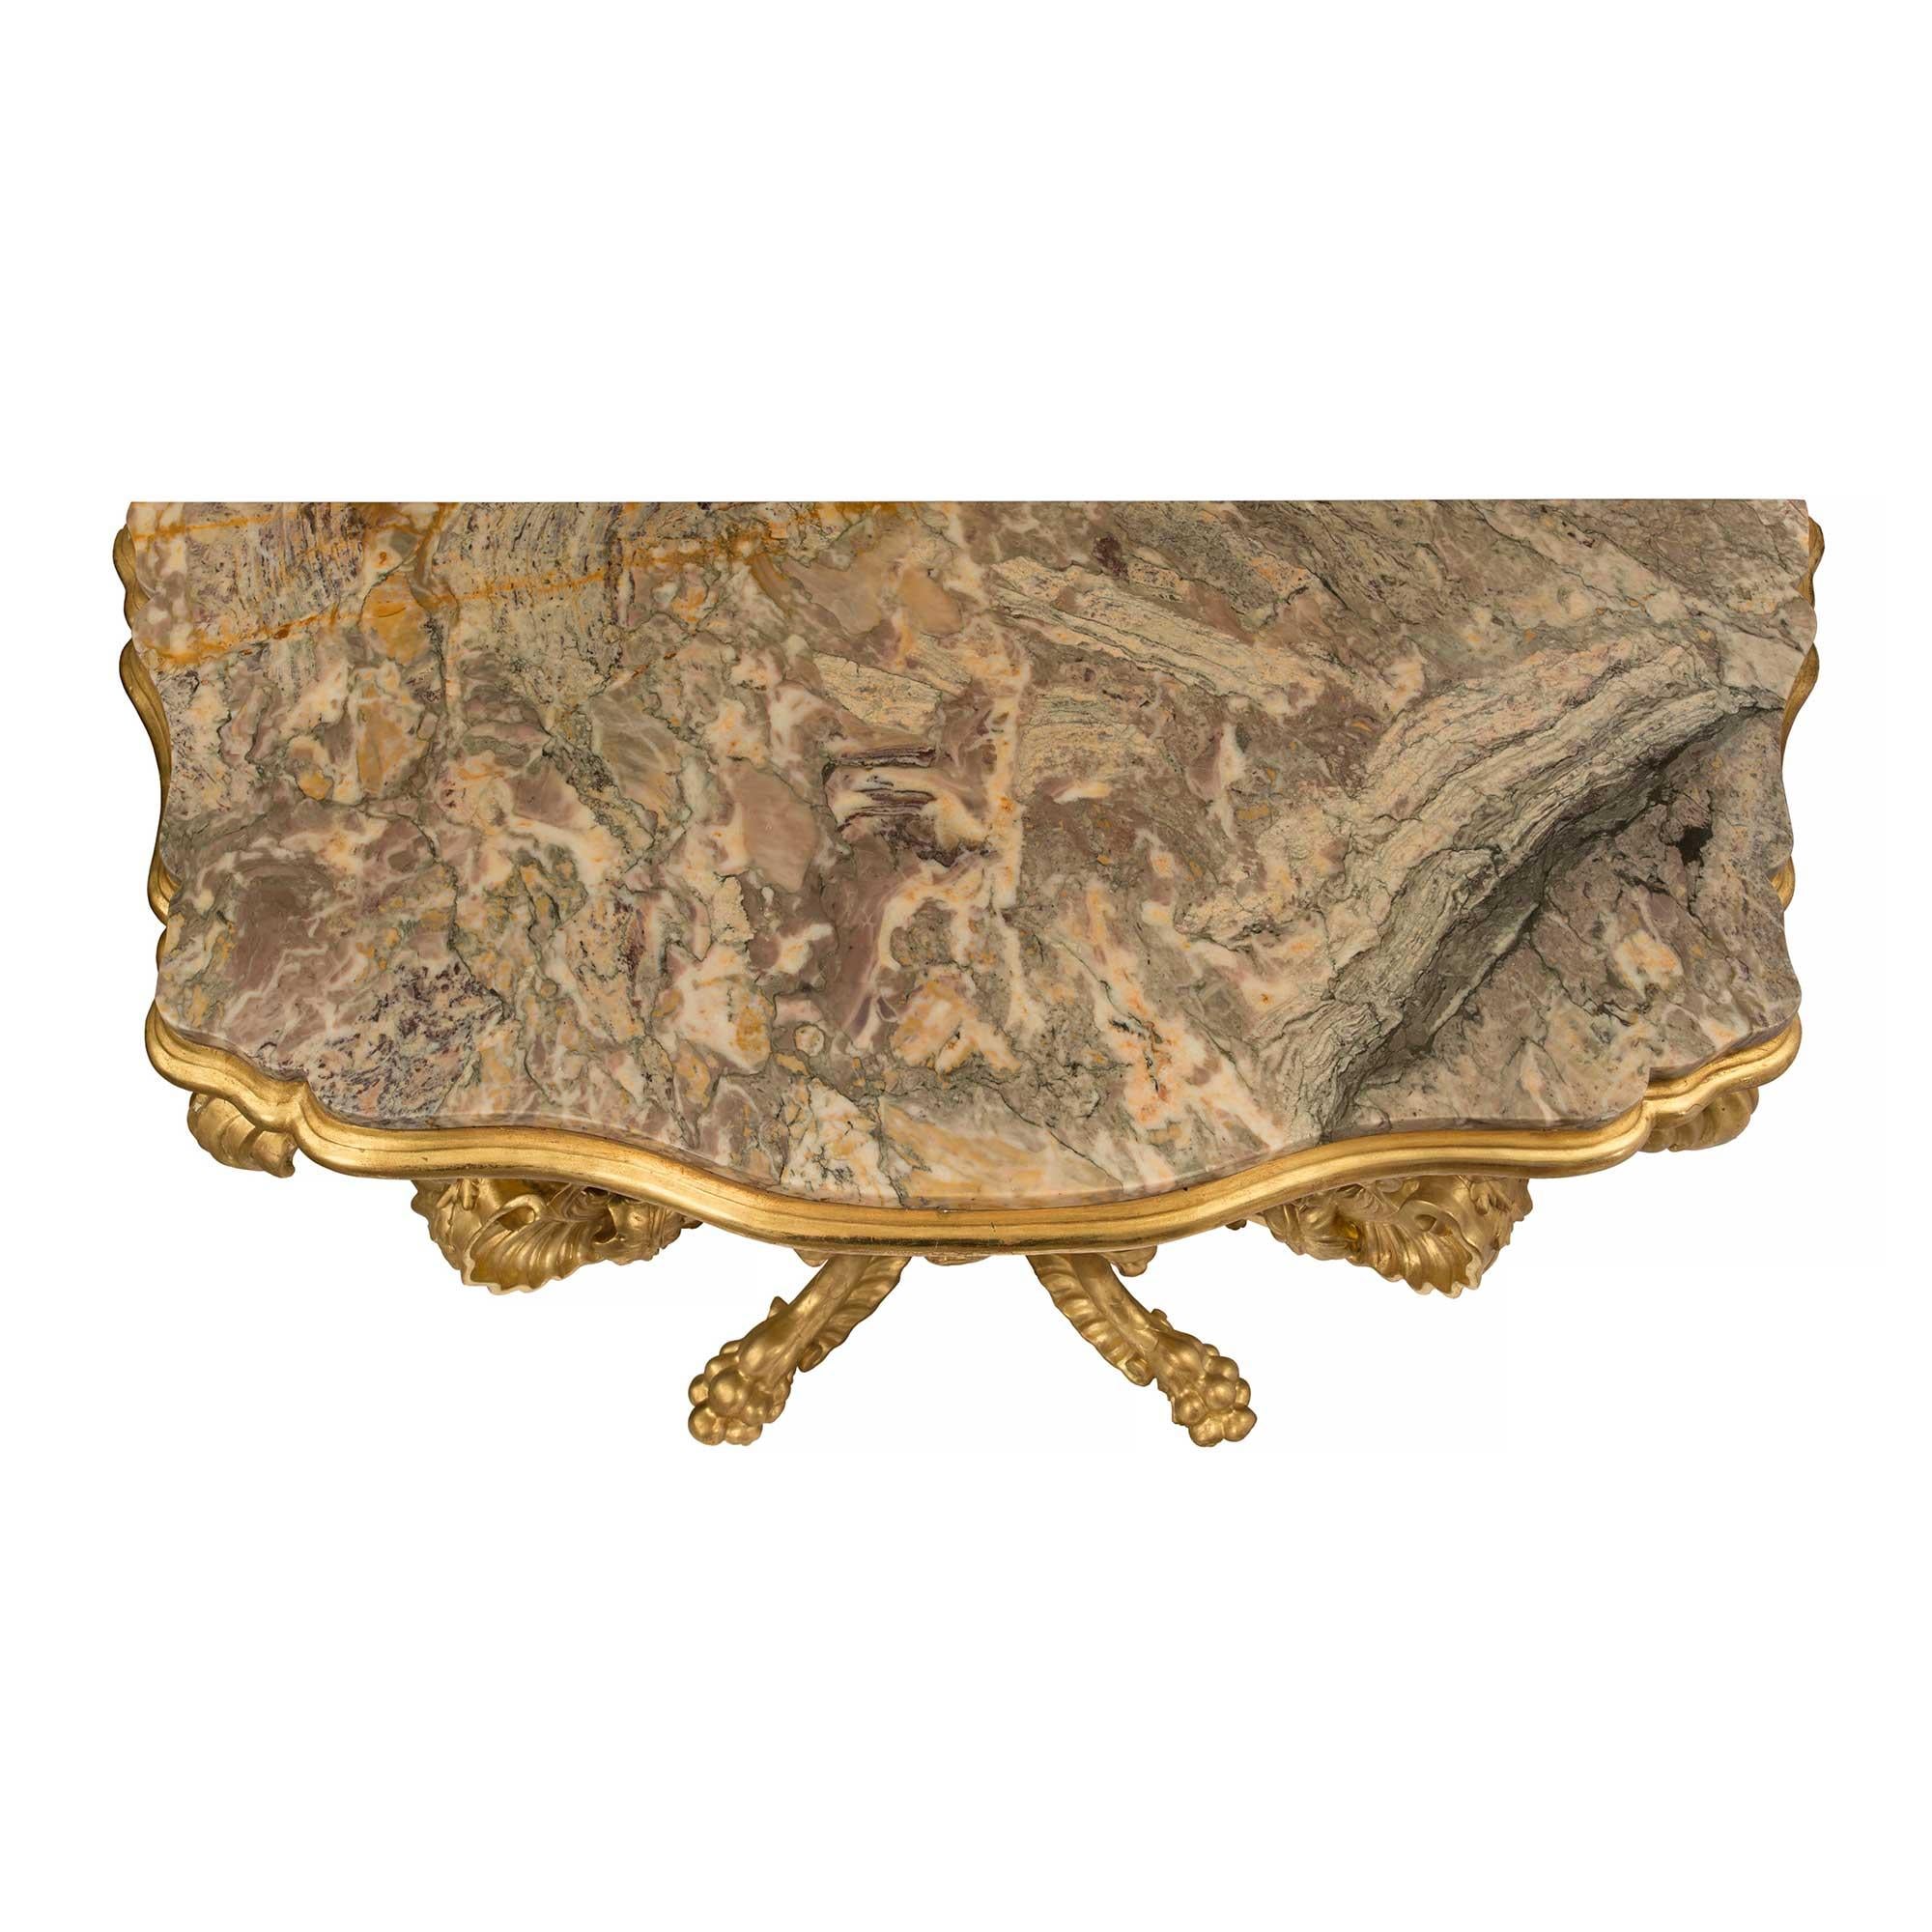 Pair of Italian 18th Century Baroque Giltwood and Marble Four Legged Consoles In Good Condition For Sale In West Palm Beach, FL